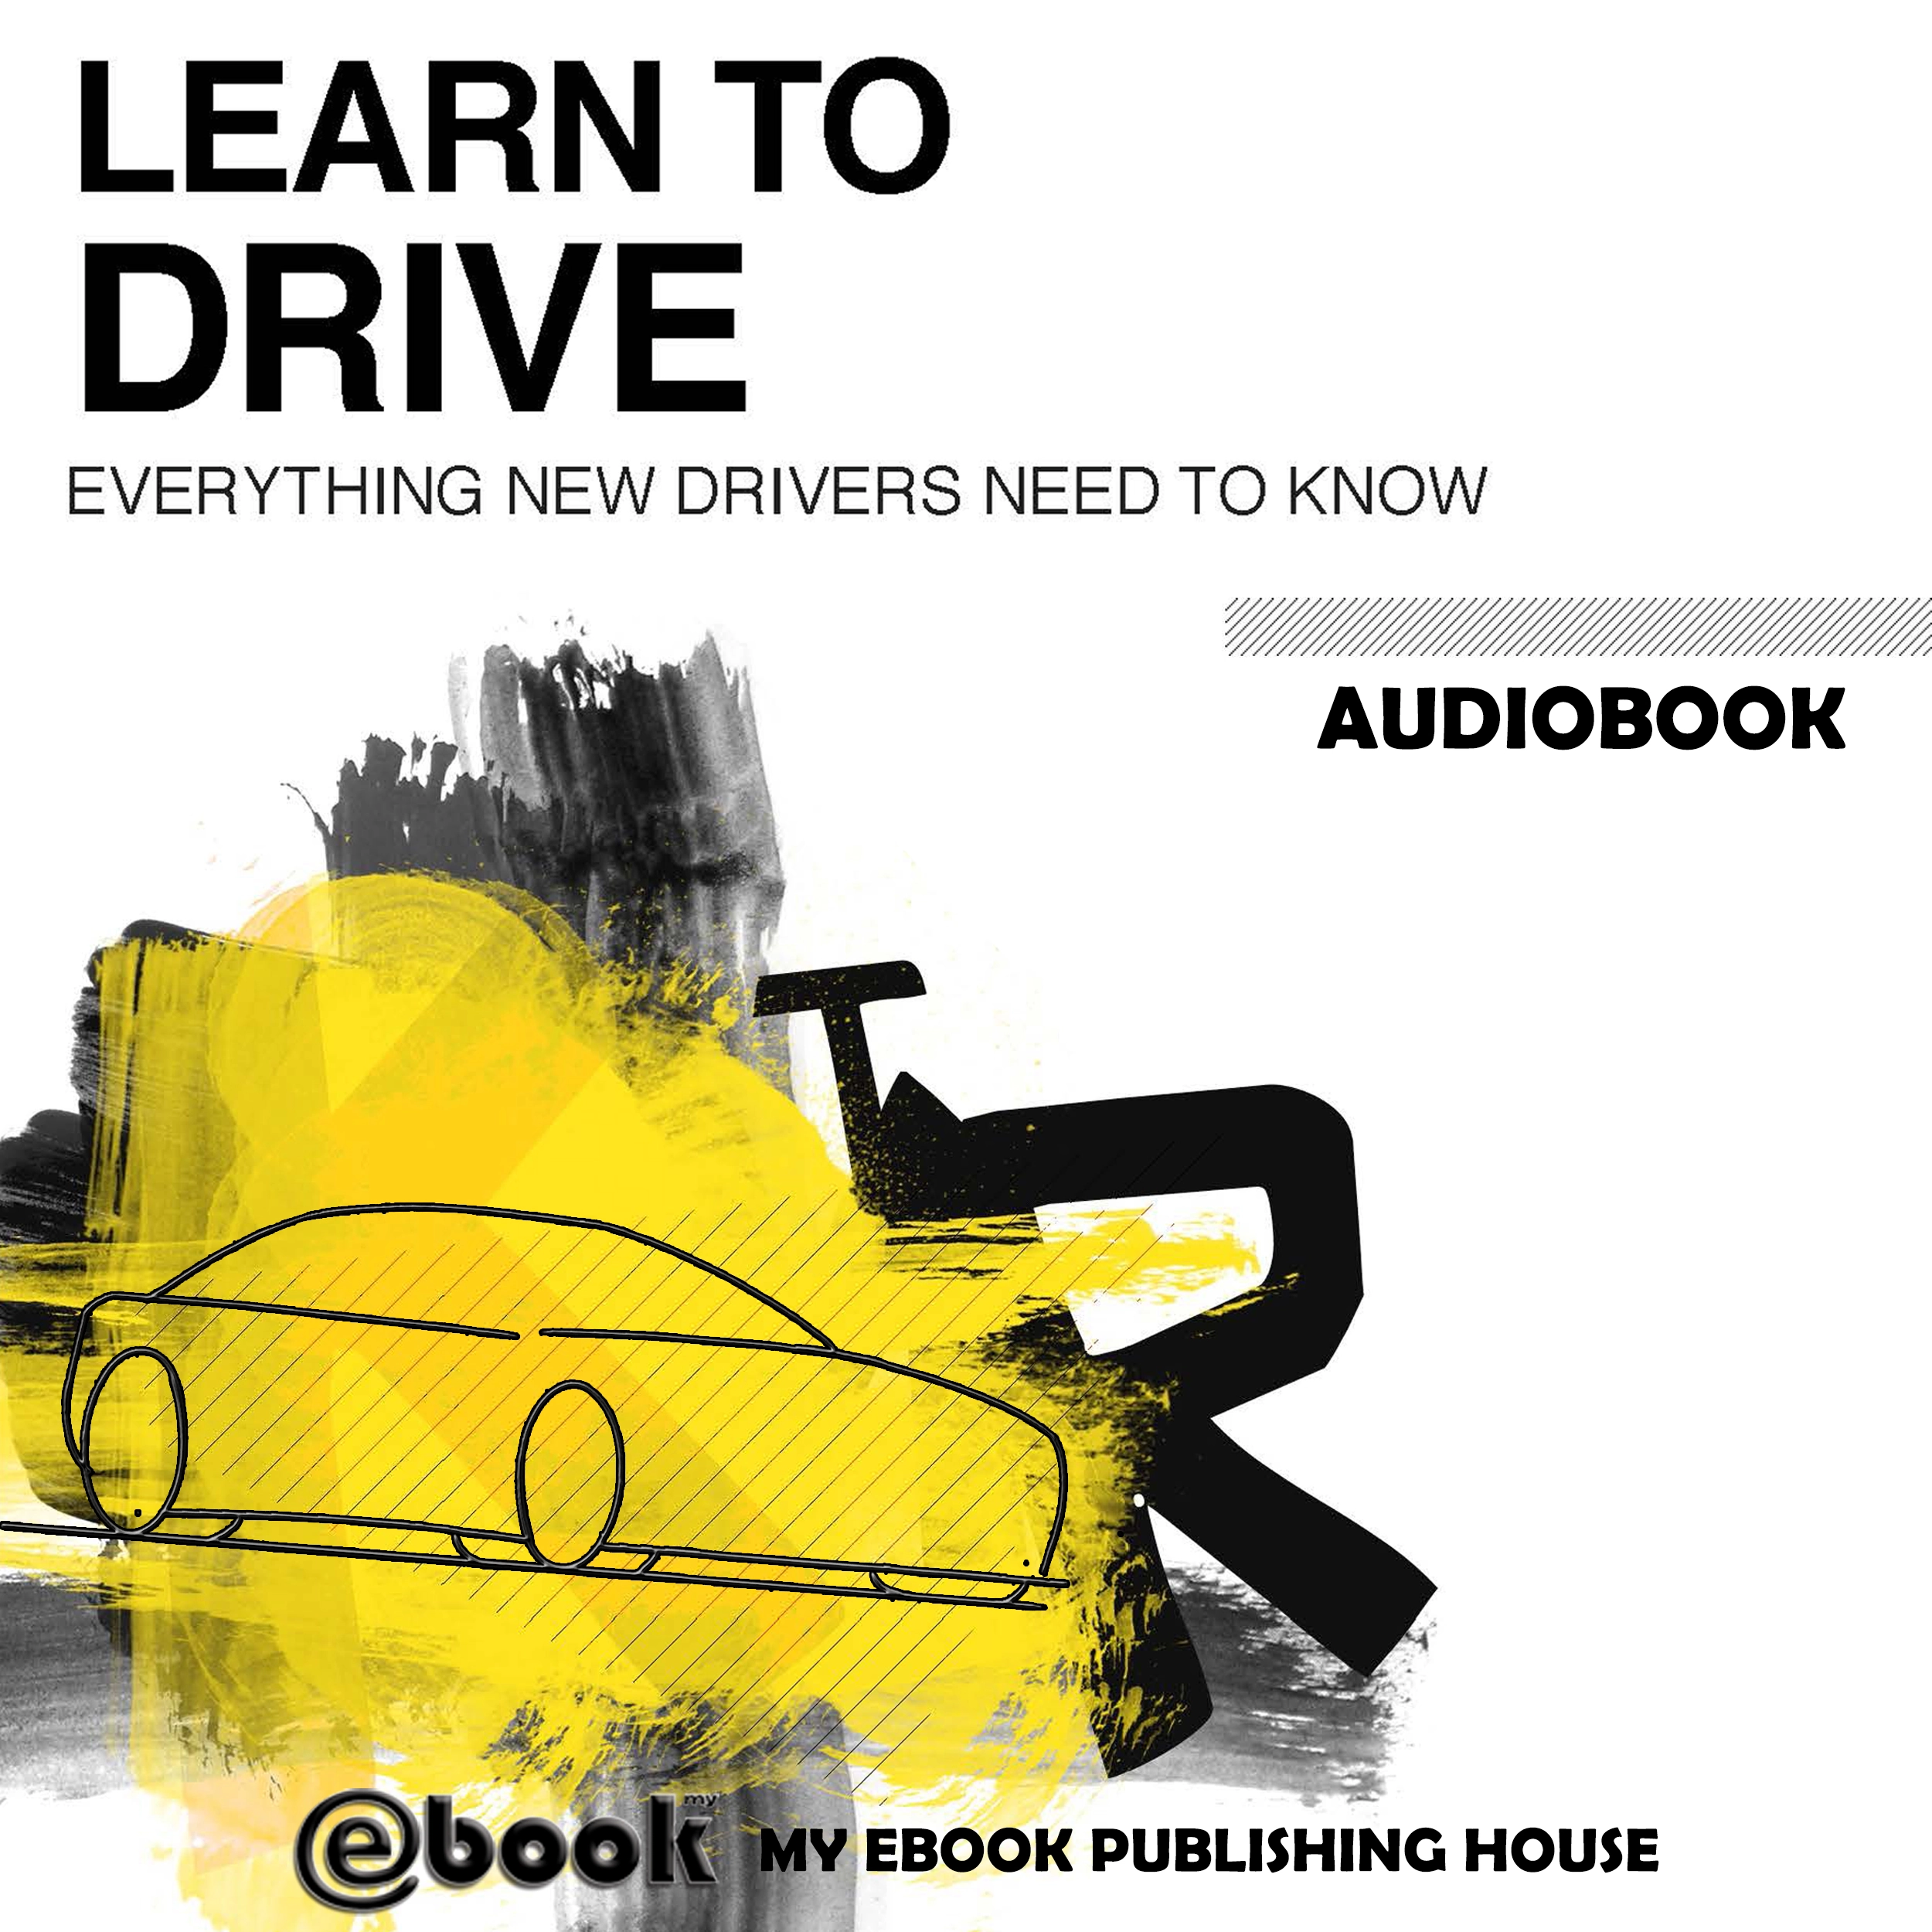 Learn to Drive - Everything New Drivers Need to Know Audiobook by My Ebook Publishing House